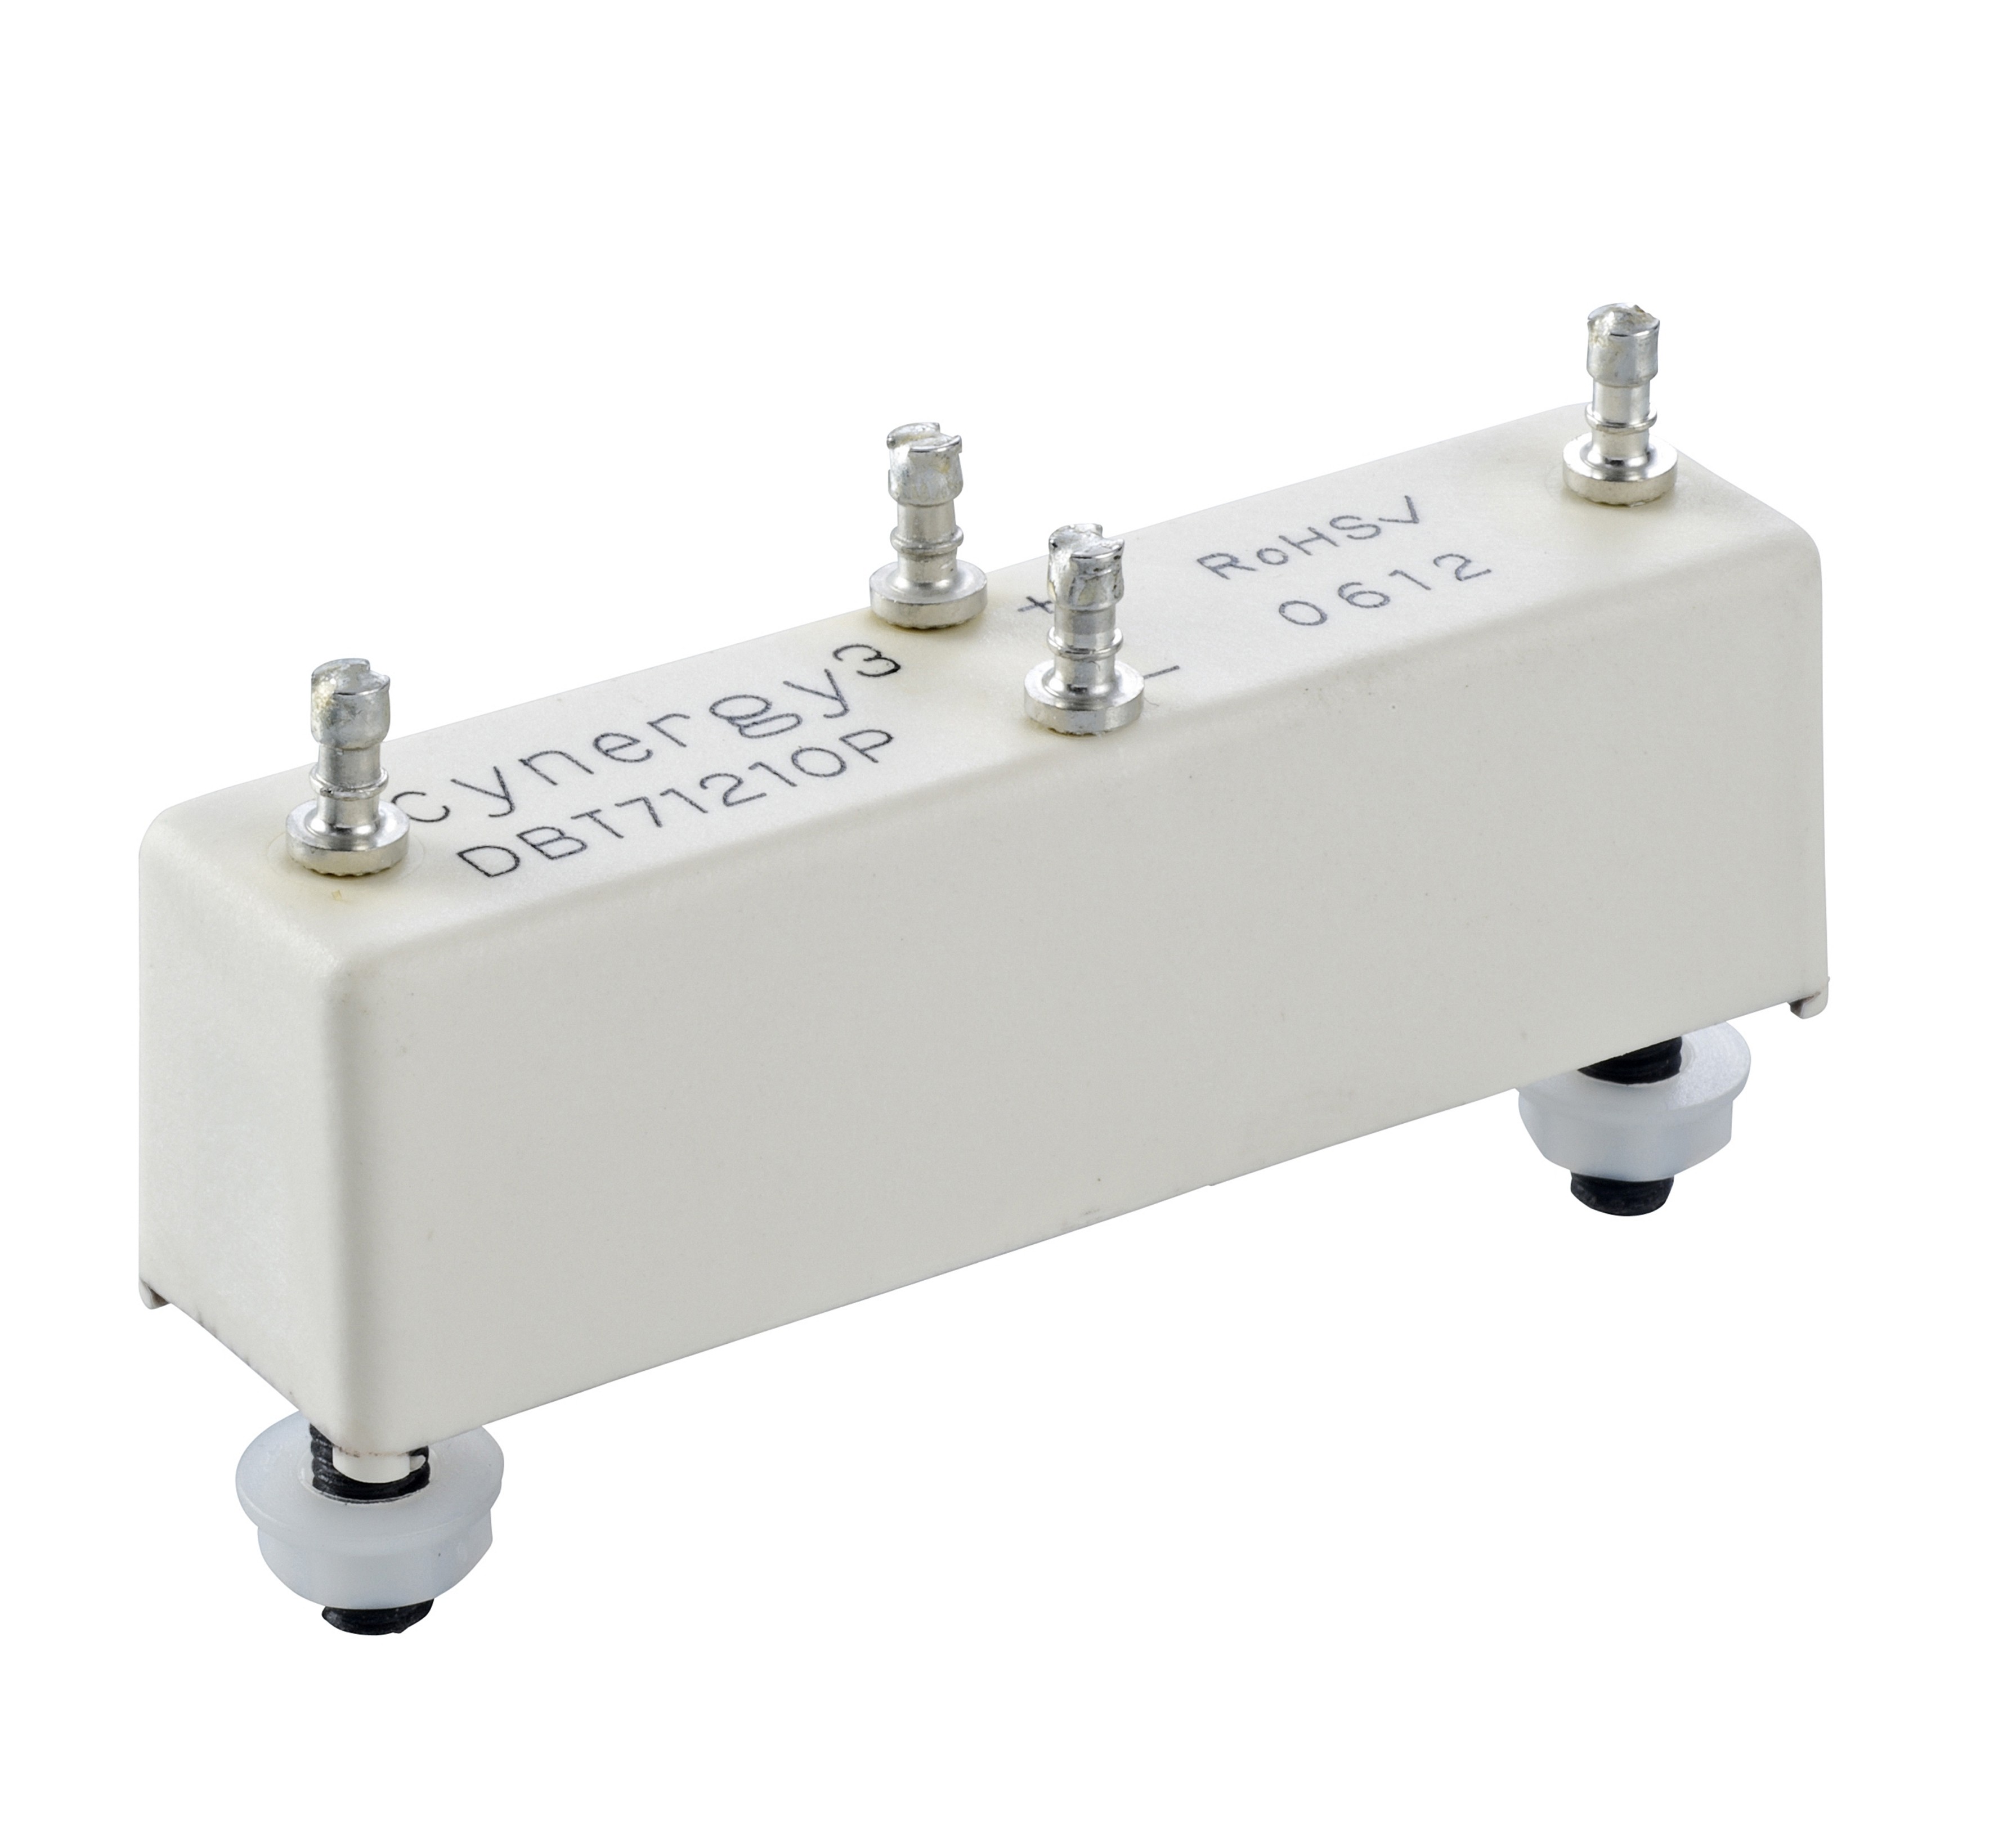 Products: Reed relay - High Voltage